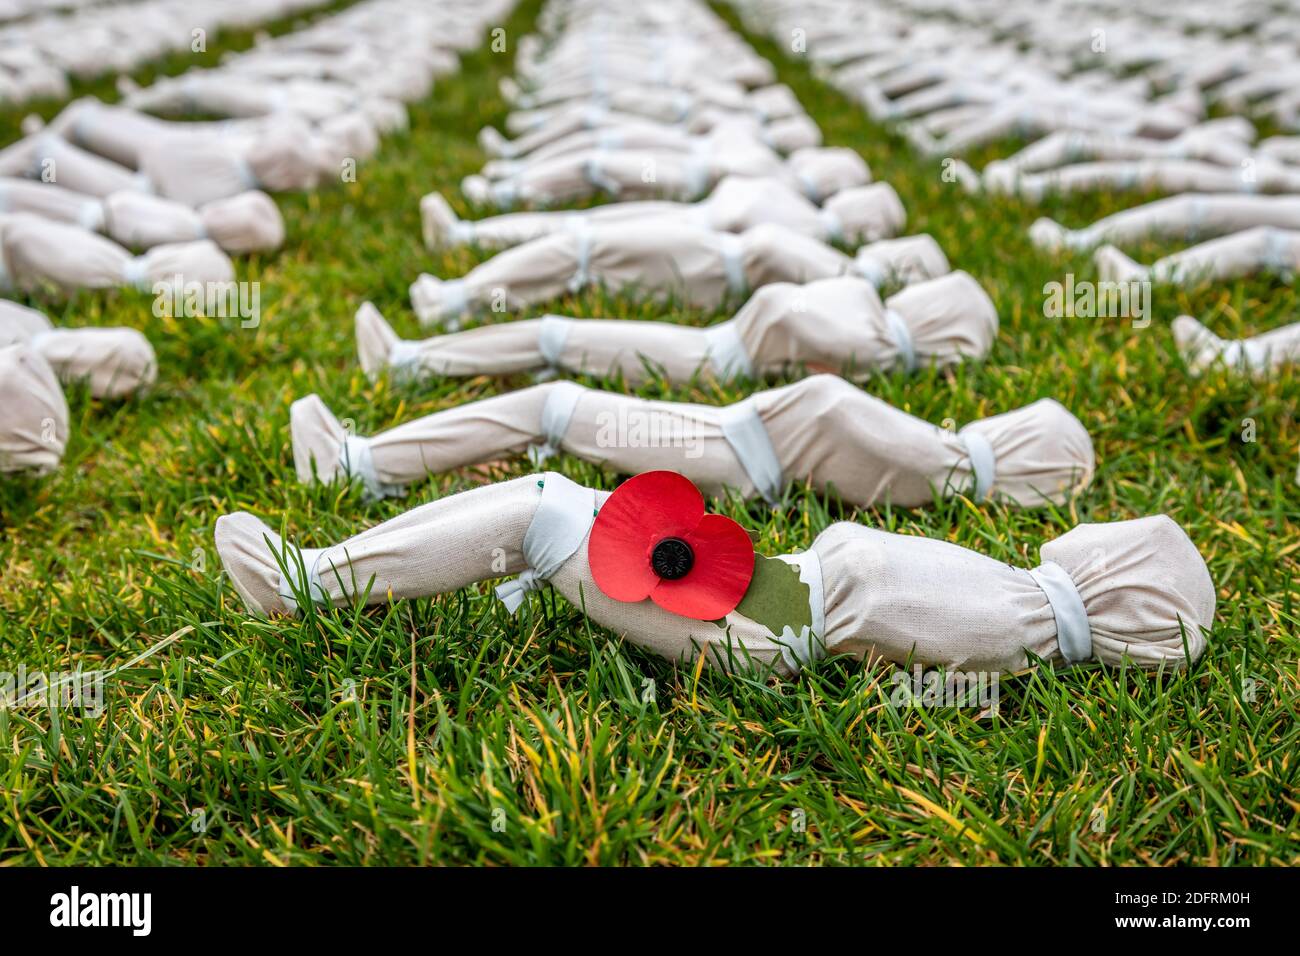 Shrouds of the Somme, Queen Elizabeth Olympic Park, London Stockfoto